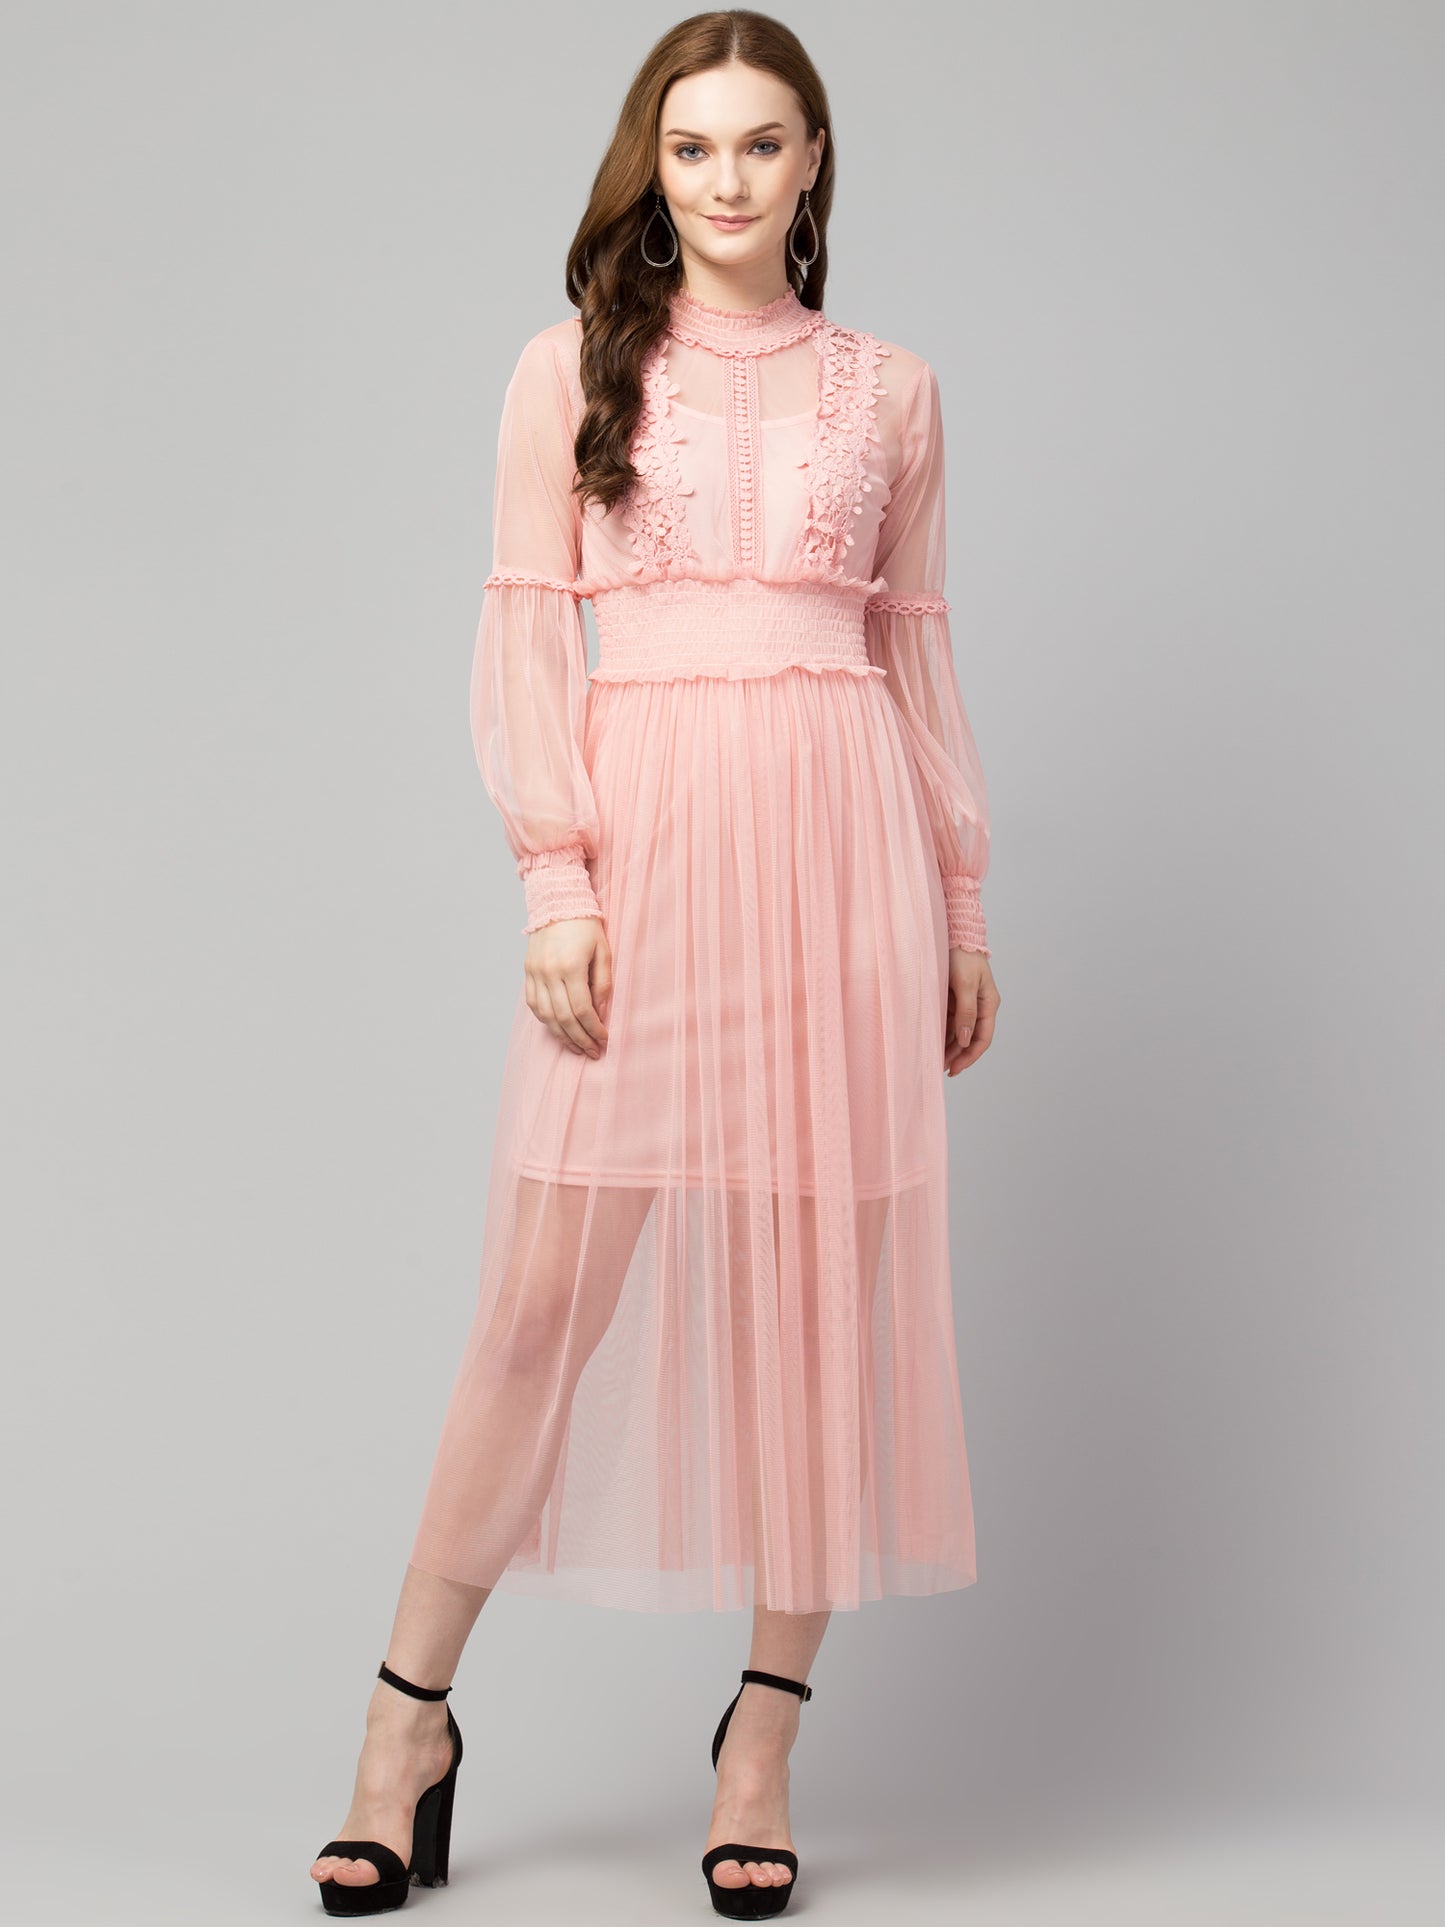 Baby Pink Lace Net Dress With Lining